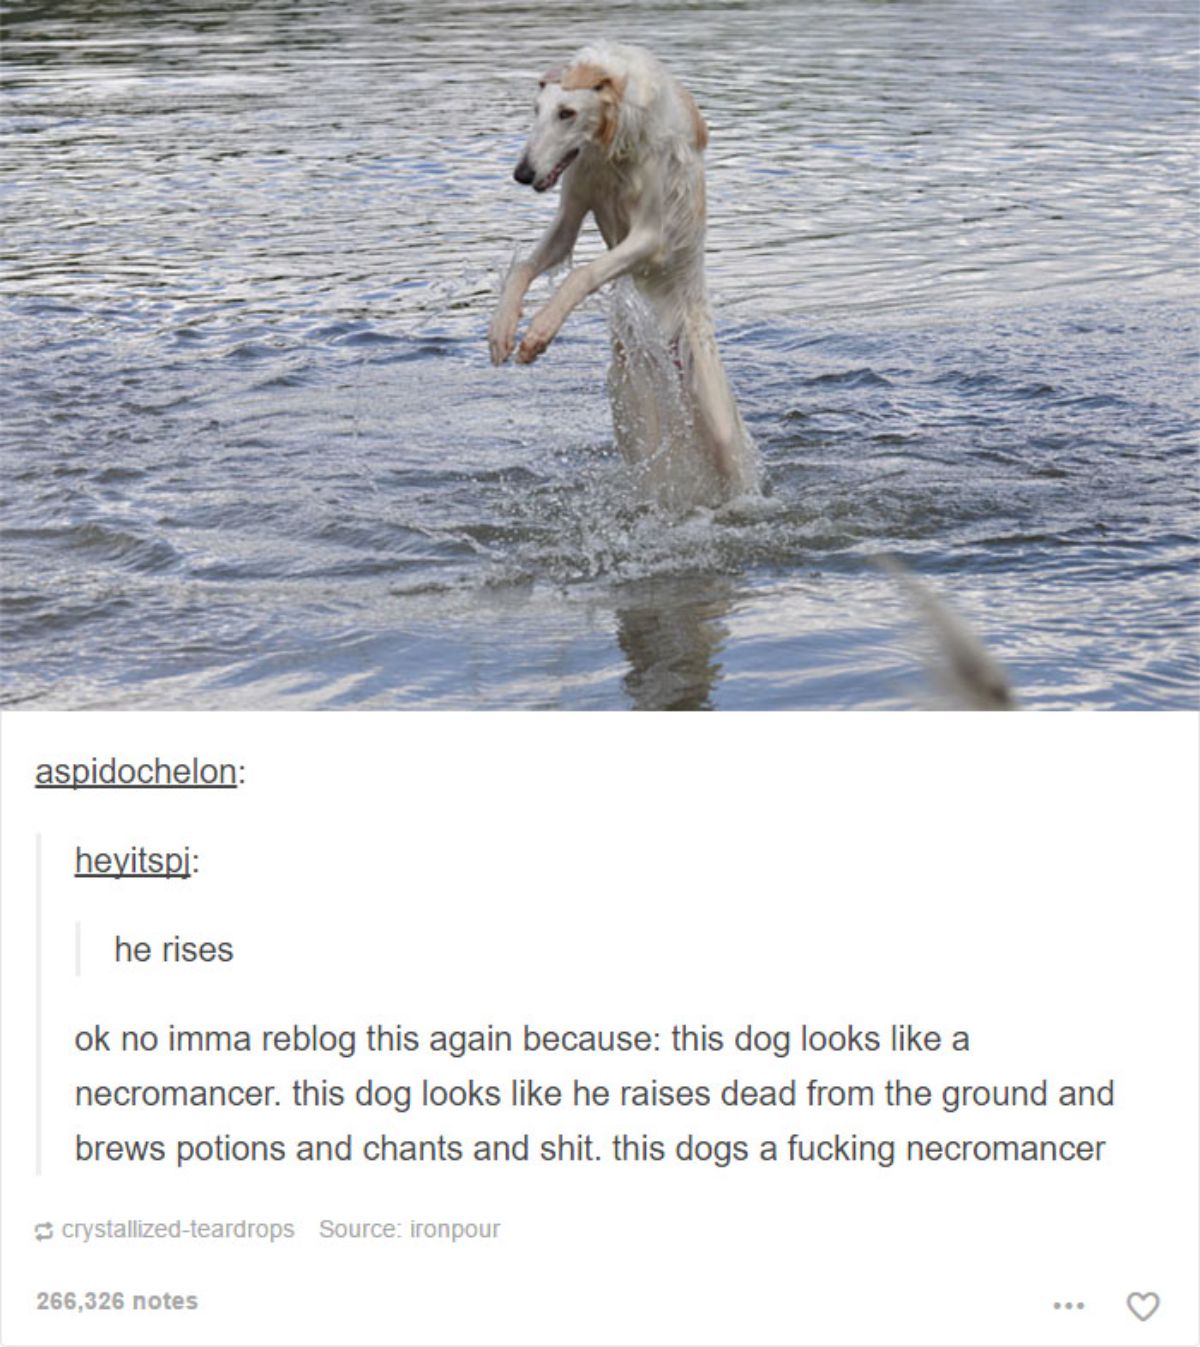 white and brown greyhound launching out of the water with a hunched back